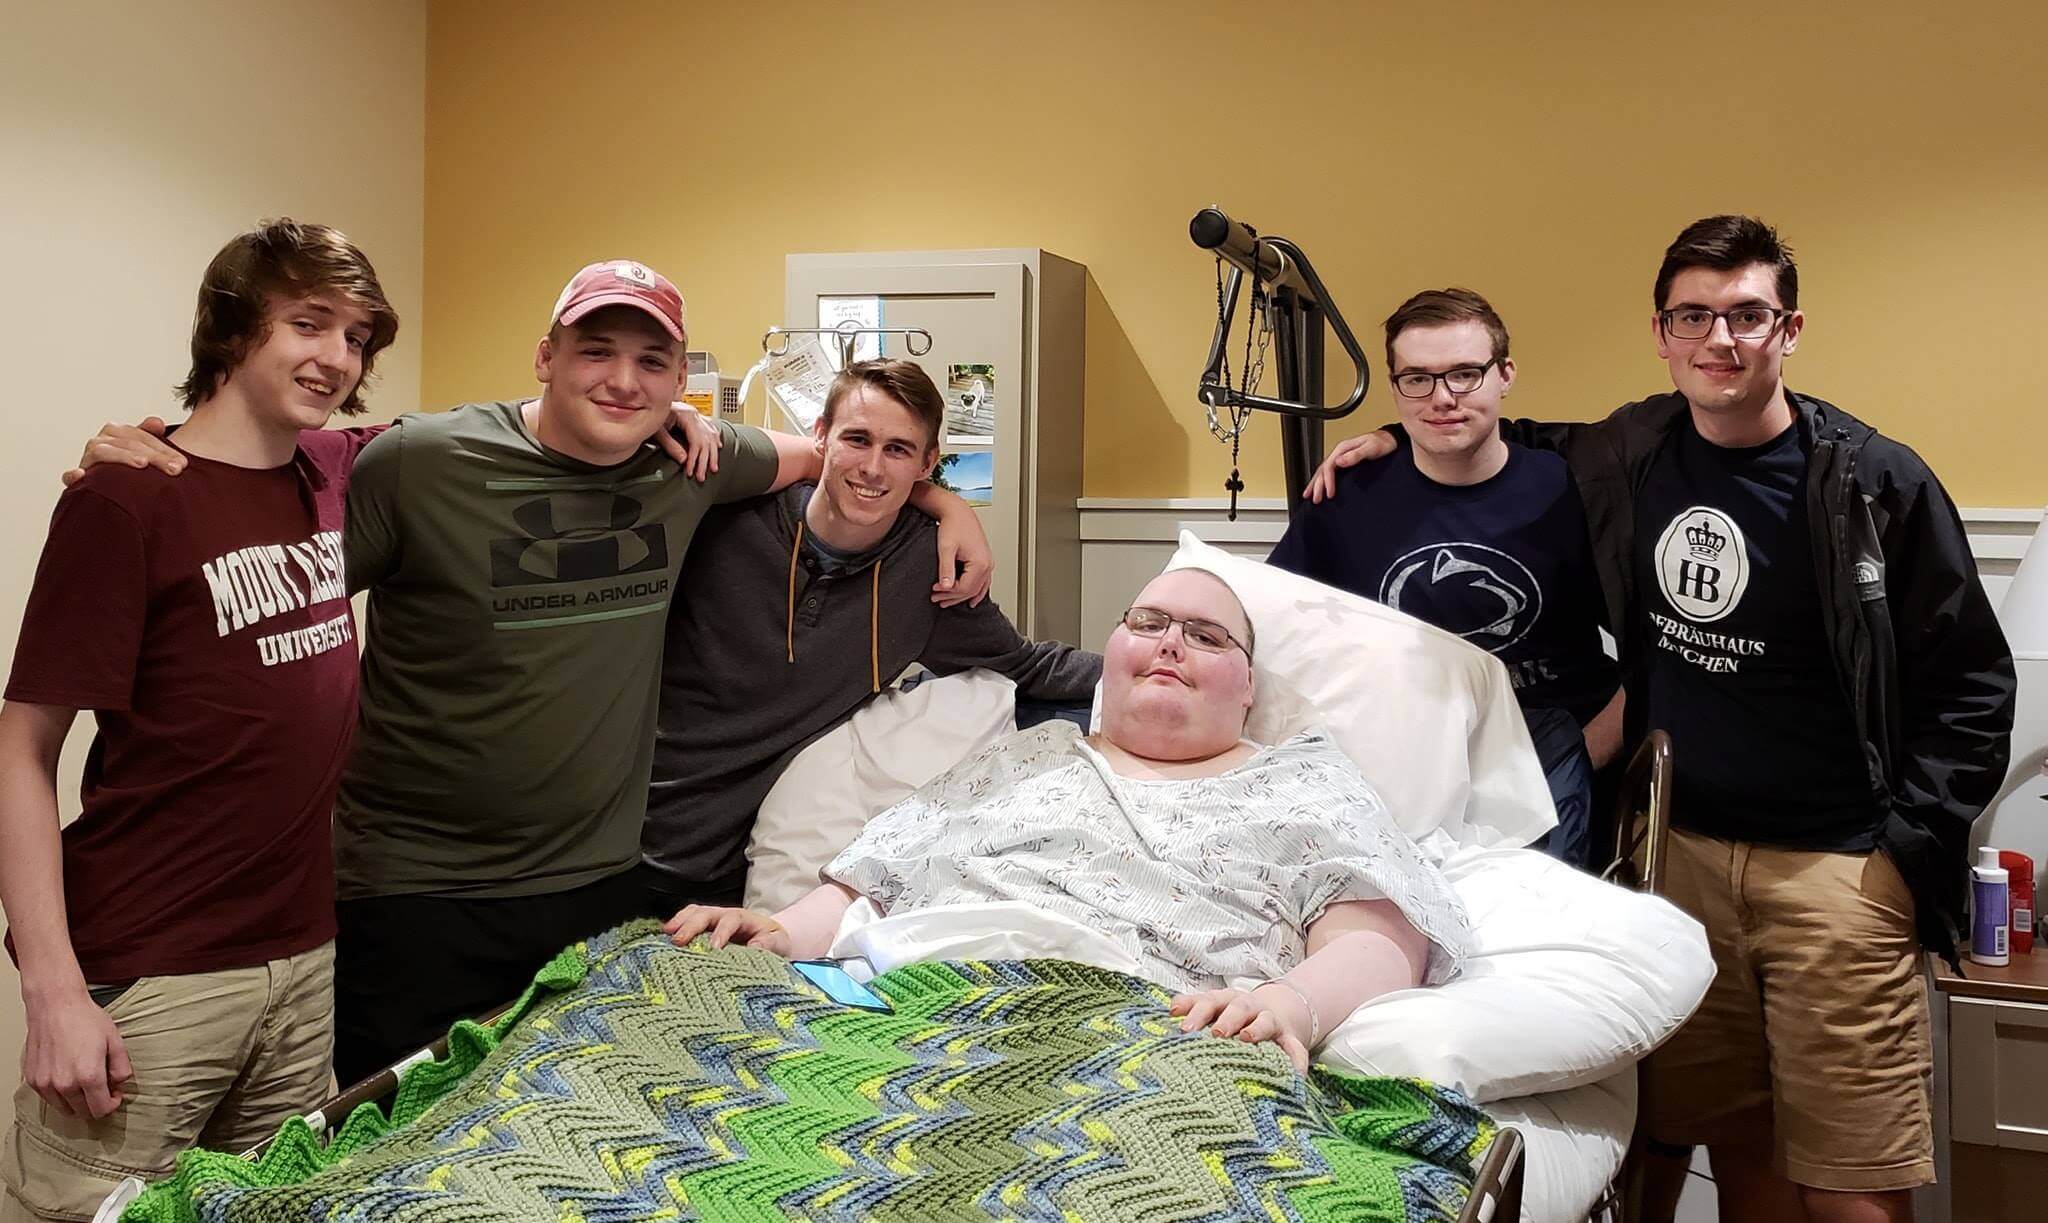 Online gaming friends meet IRL after one receives terminal cancer diagnosis